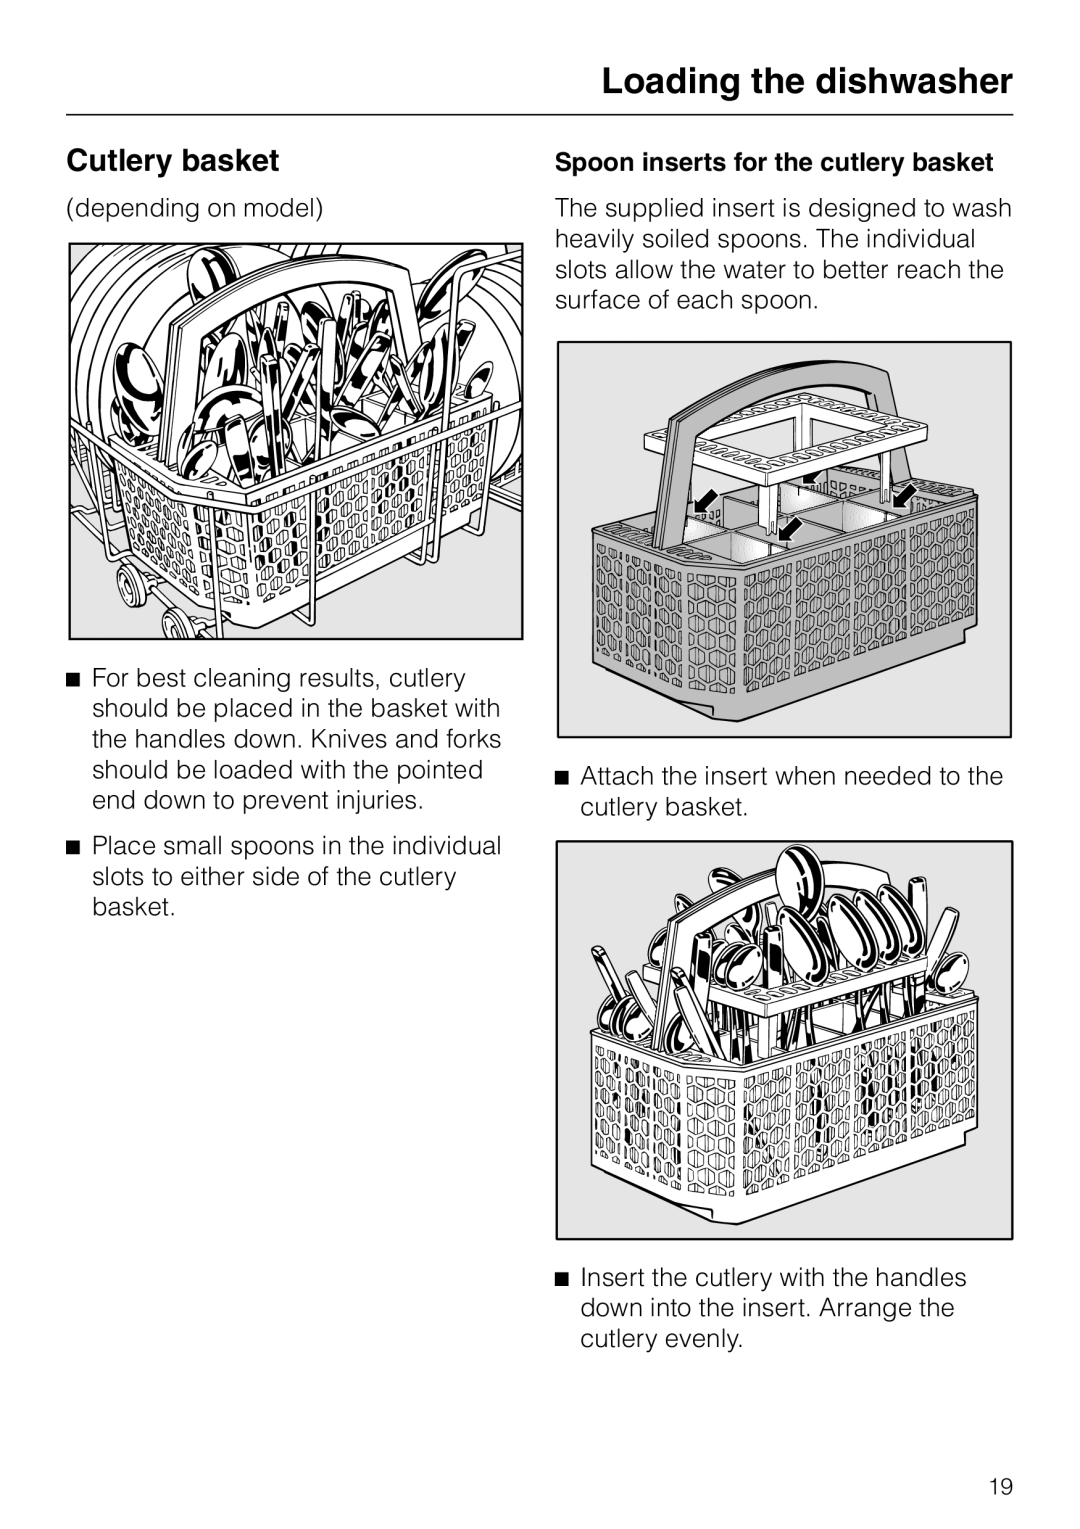 Miele G1470, G2470 operating instructions Cutlery basket, Loading the dishwasher, Spoon inserts for the cutlery basket 